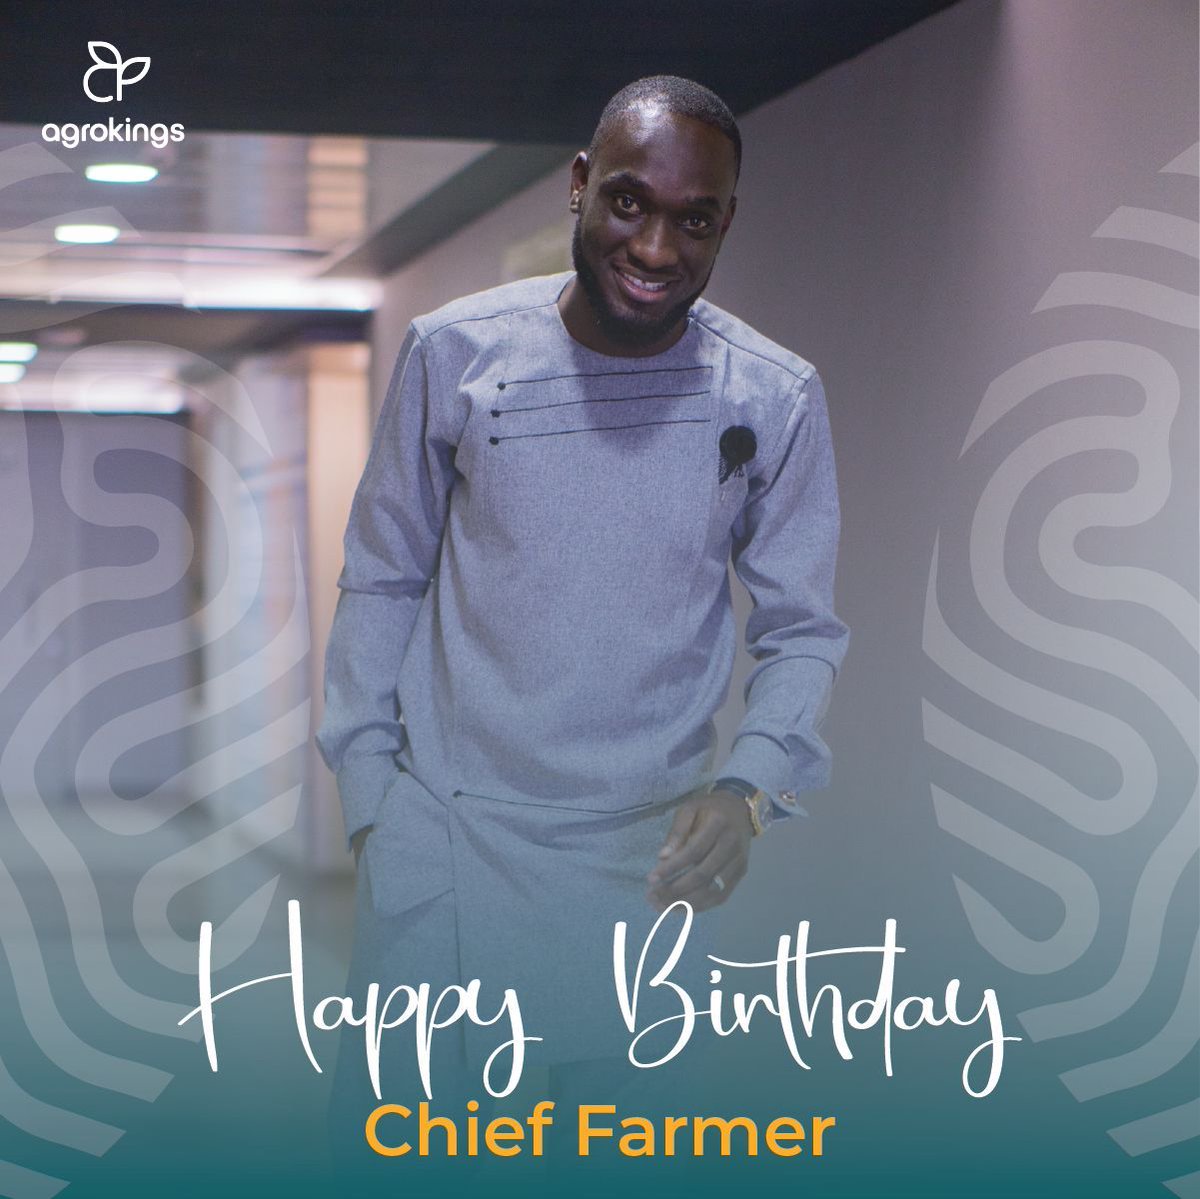 Warmest birthday wishes to the visionary leader steering our company to greater heights. Have a fantastic celebration, Dear Chief Farmer!